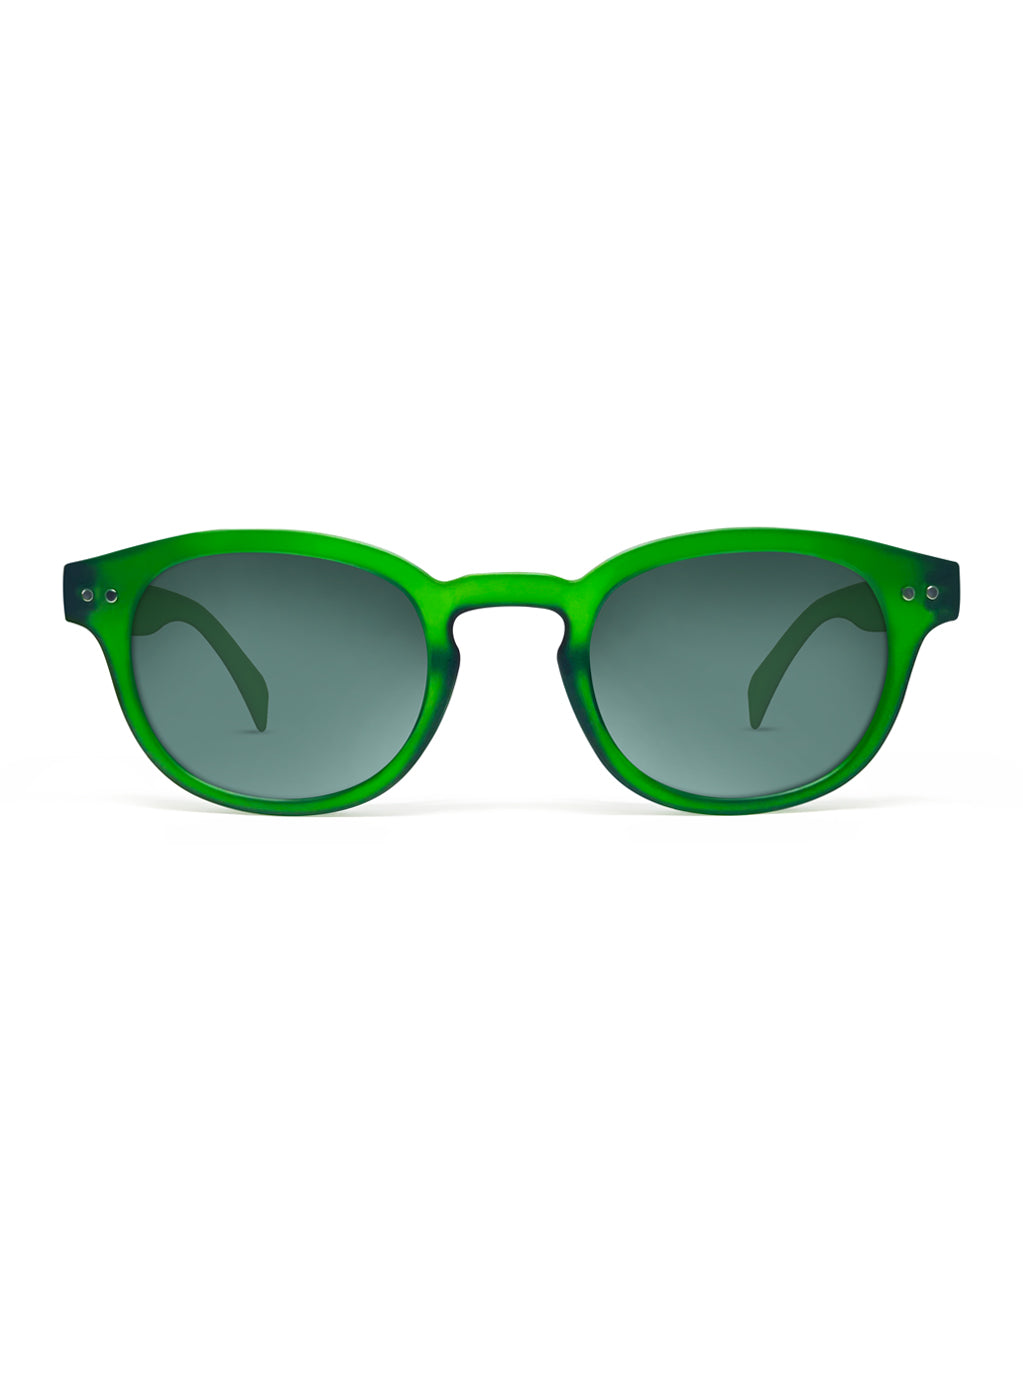 Reborn Green with Green Lenses